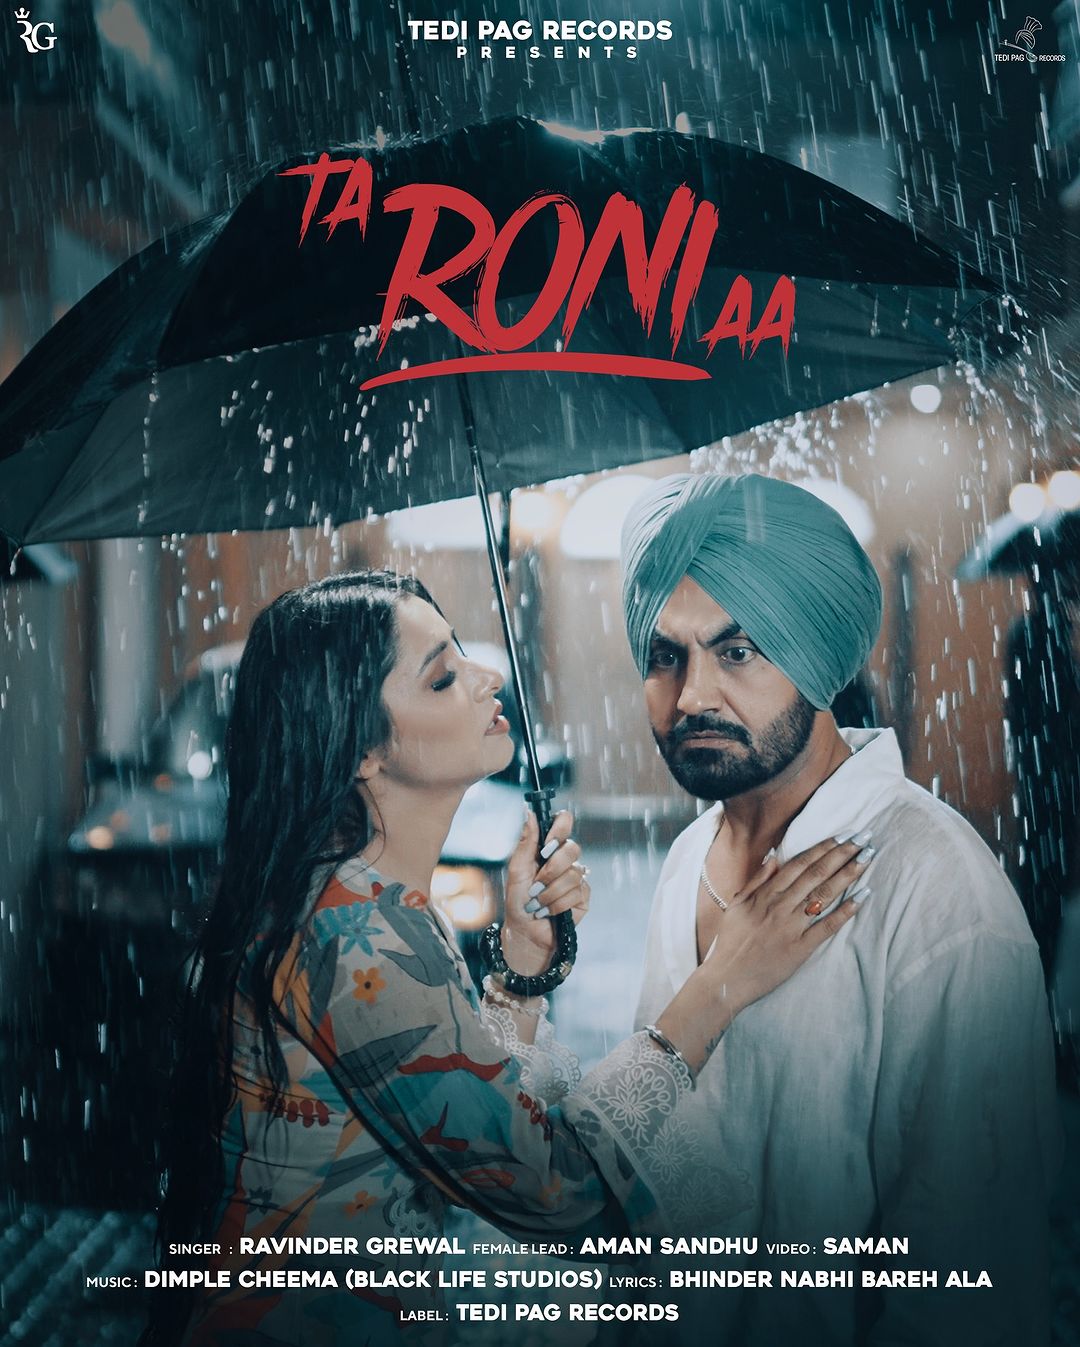 Our Dazzling Darling Aman Sandhu Treats Us With Her New Music Video, “TA RONI AA”. Her Impressive Acting Made Everyone Fall In Love With Her. Read Here To Learn How She Feels On Top Of The World For This Project!